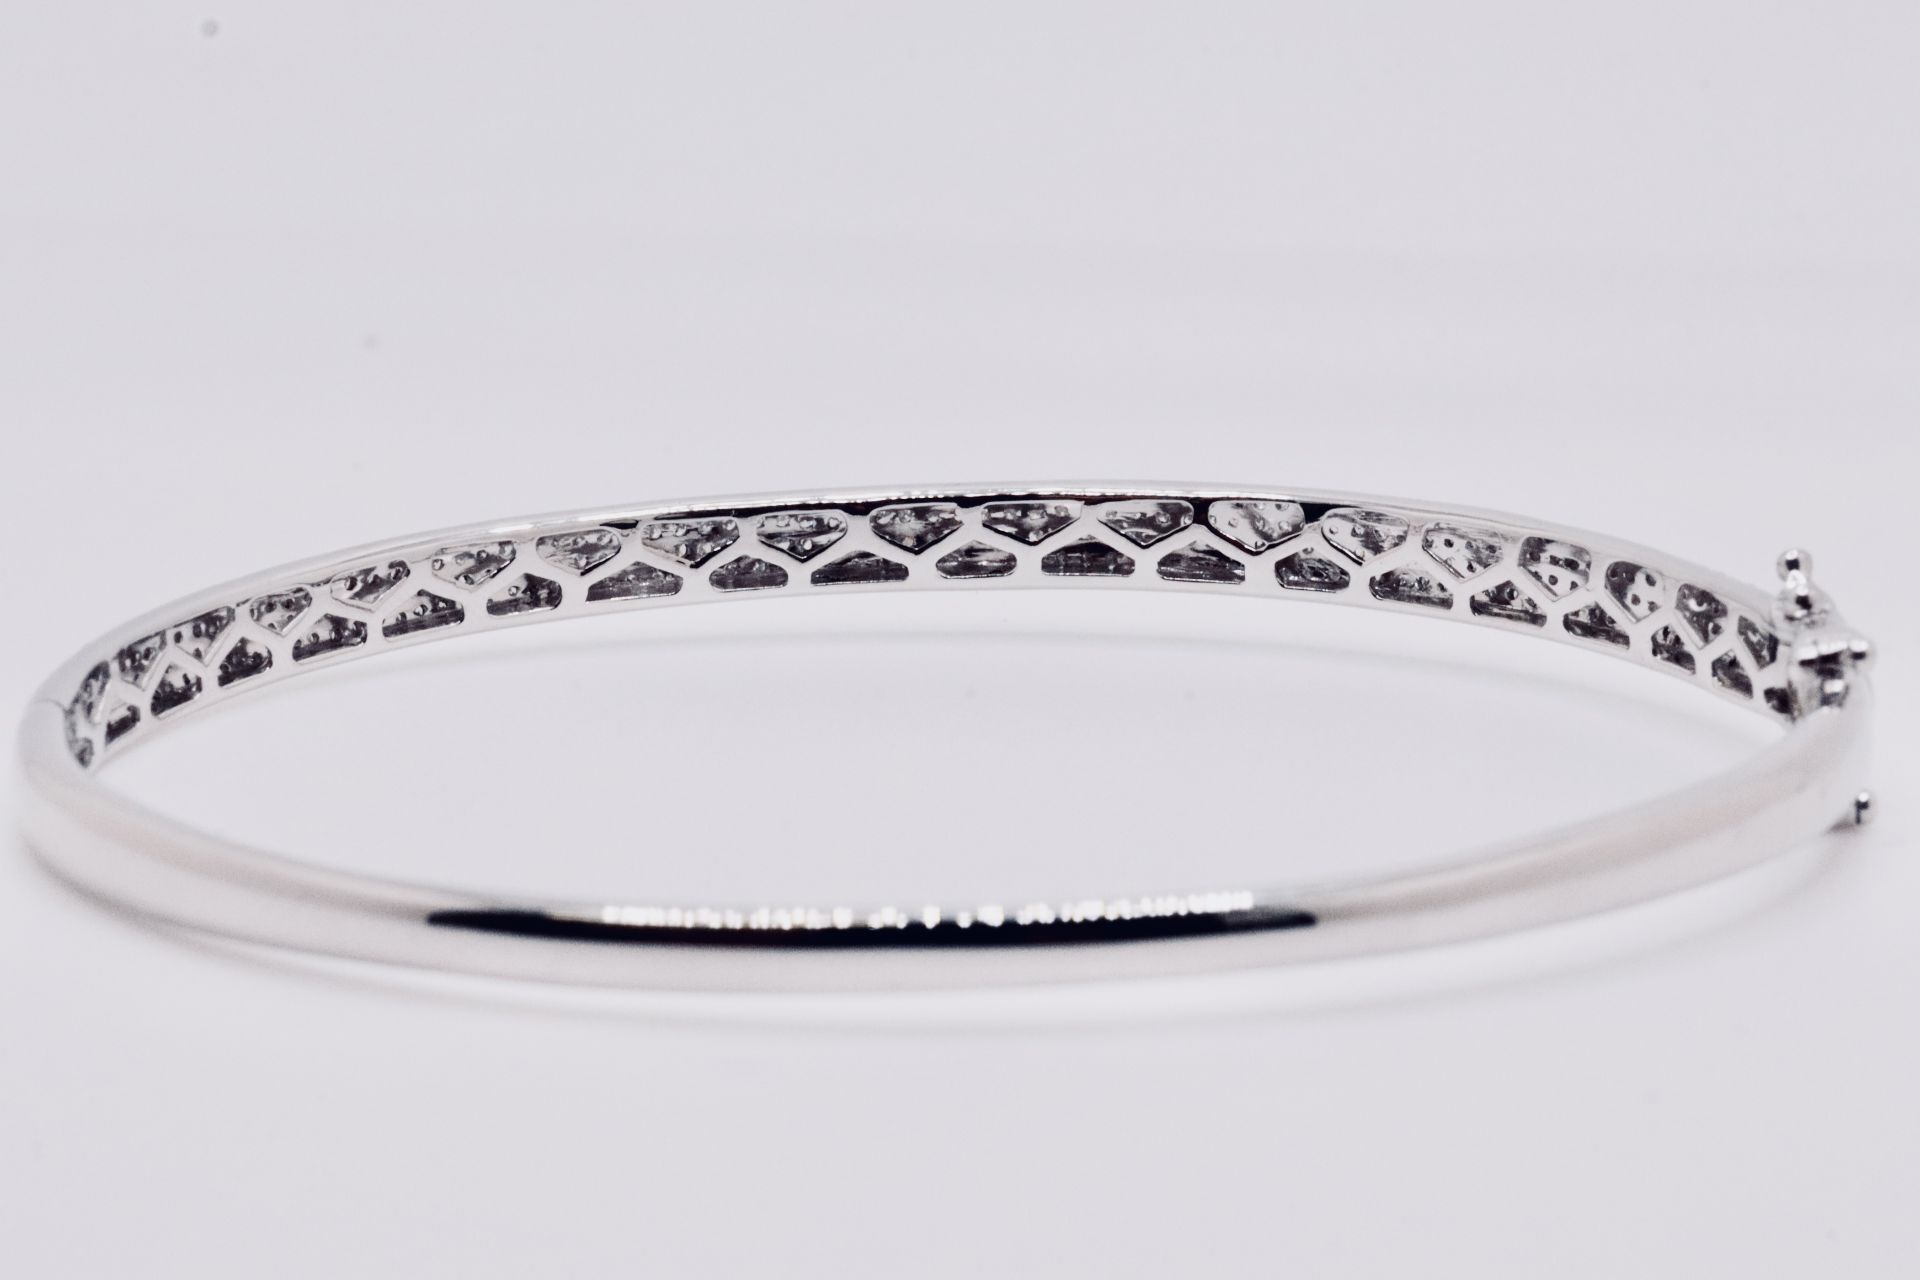 Round Brilliant Cut Pave 1.20 Carat Natural Diamond 9ct White Gold Bangle - G/H Color - SI Clarity - Image 12 of 12